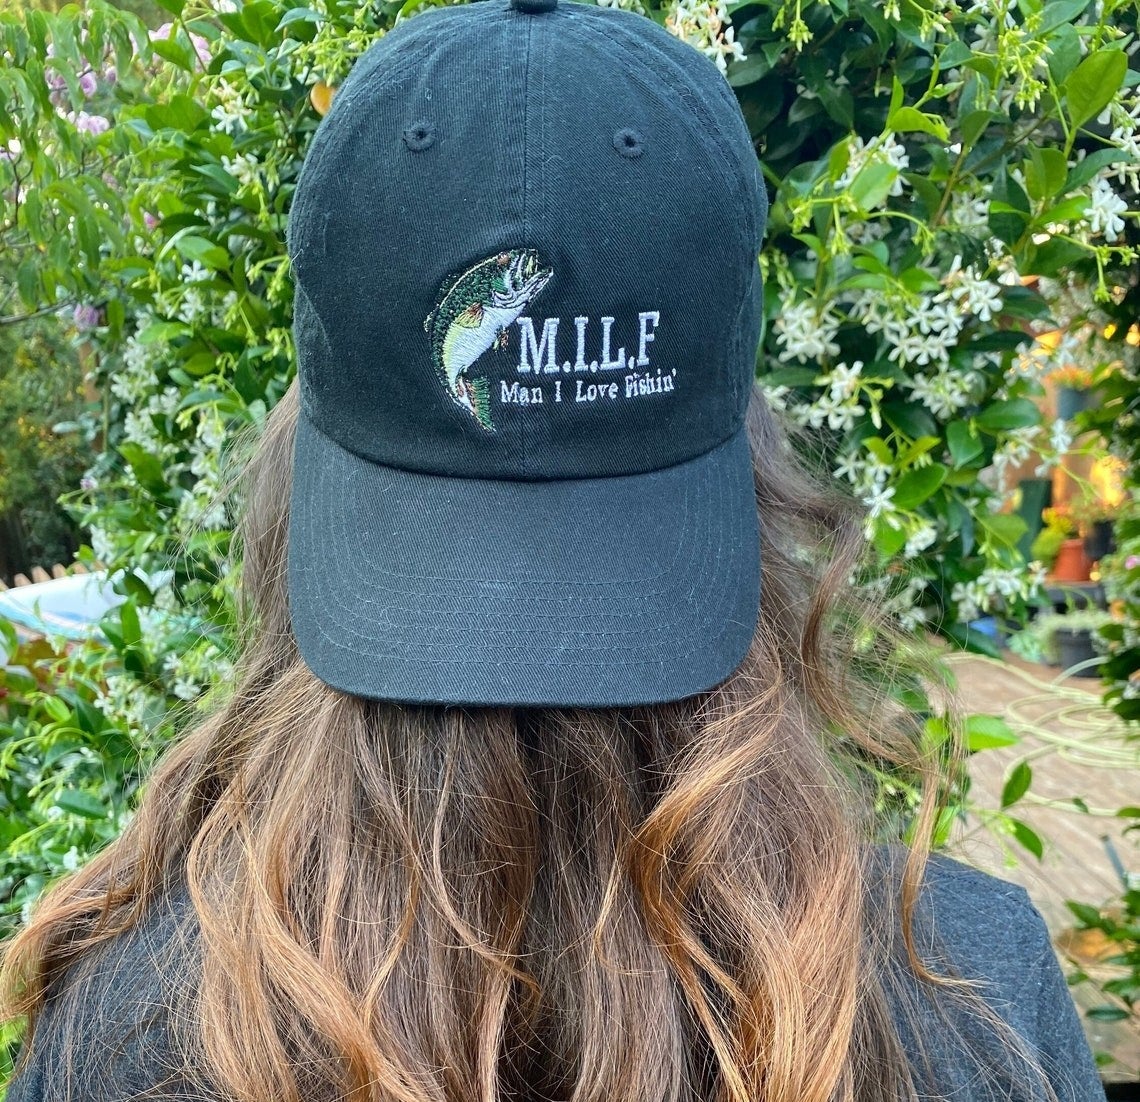 model wears hat that says MILF man i love to fish